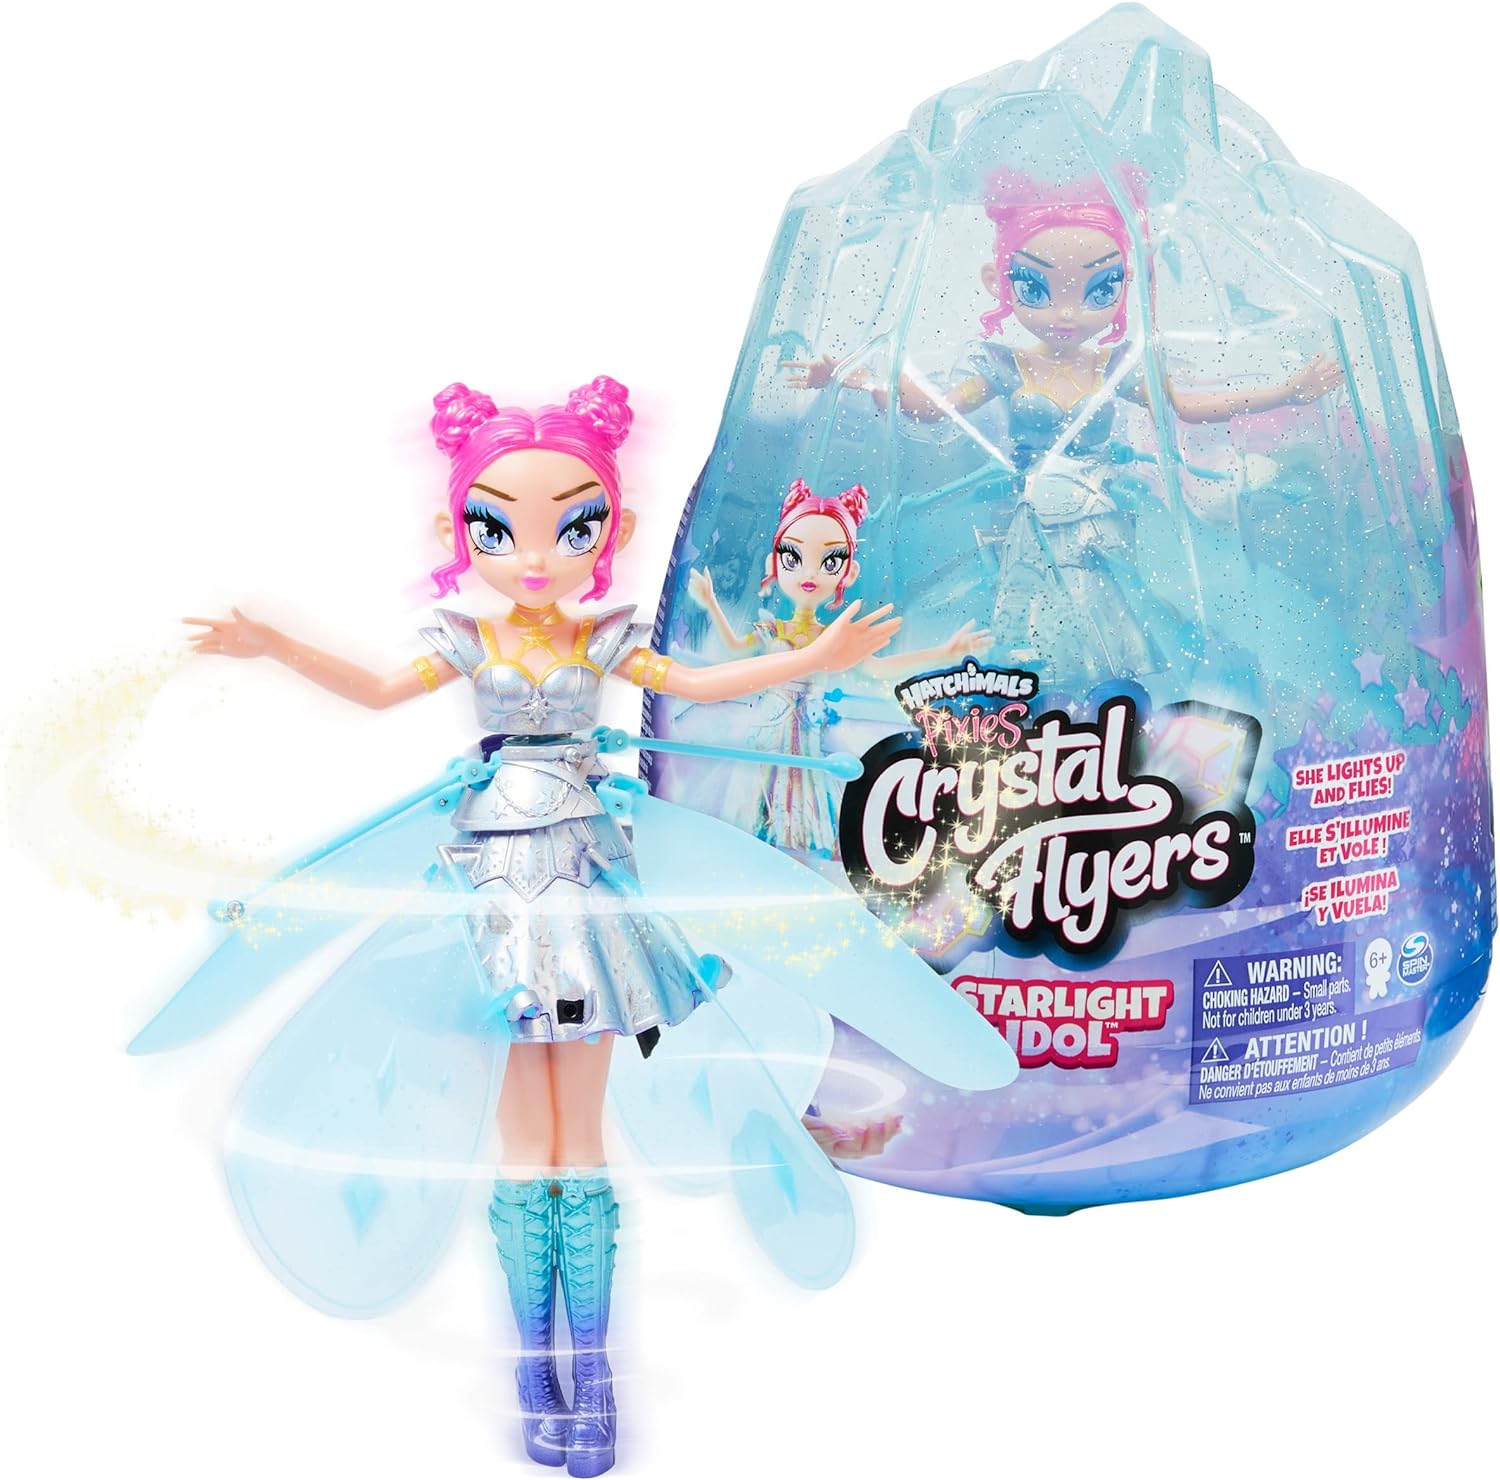 Read more about the article Hatchimals Pixies Crystal Flyers Starlight Idol Toy Review